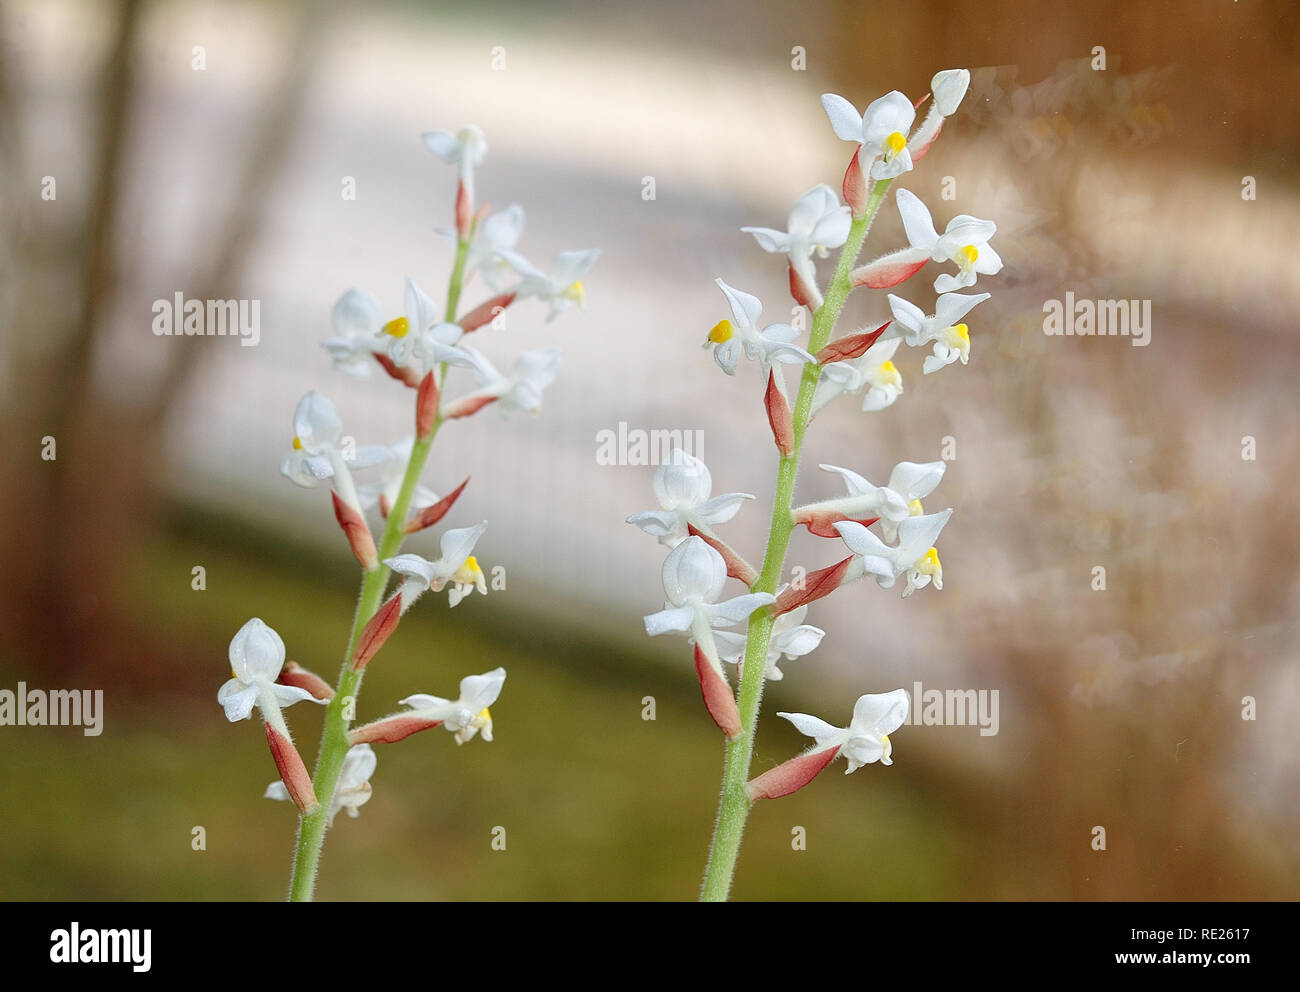 inflorescences of a jewel orchid with tiny white blossoms at a window Stock Photo